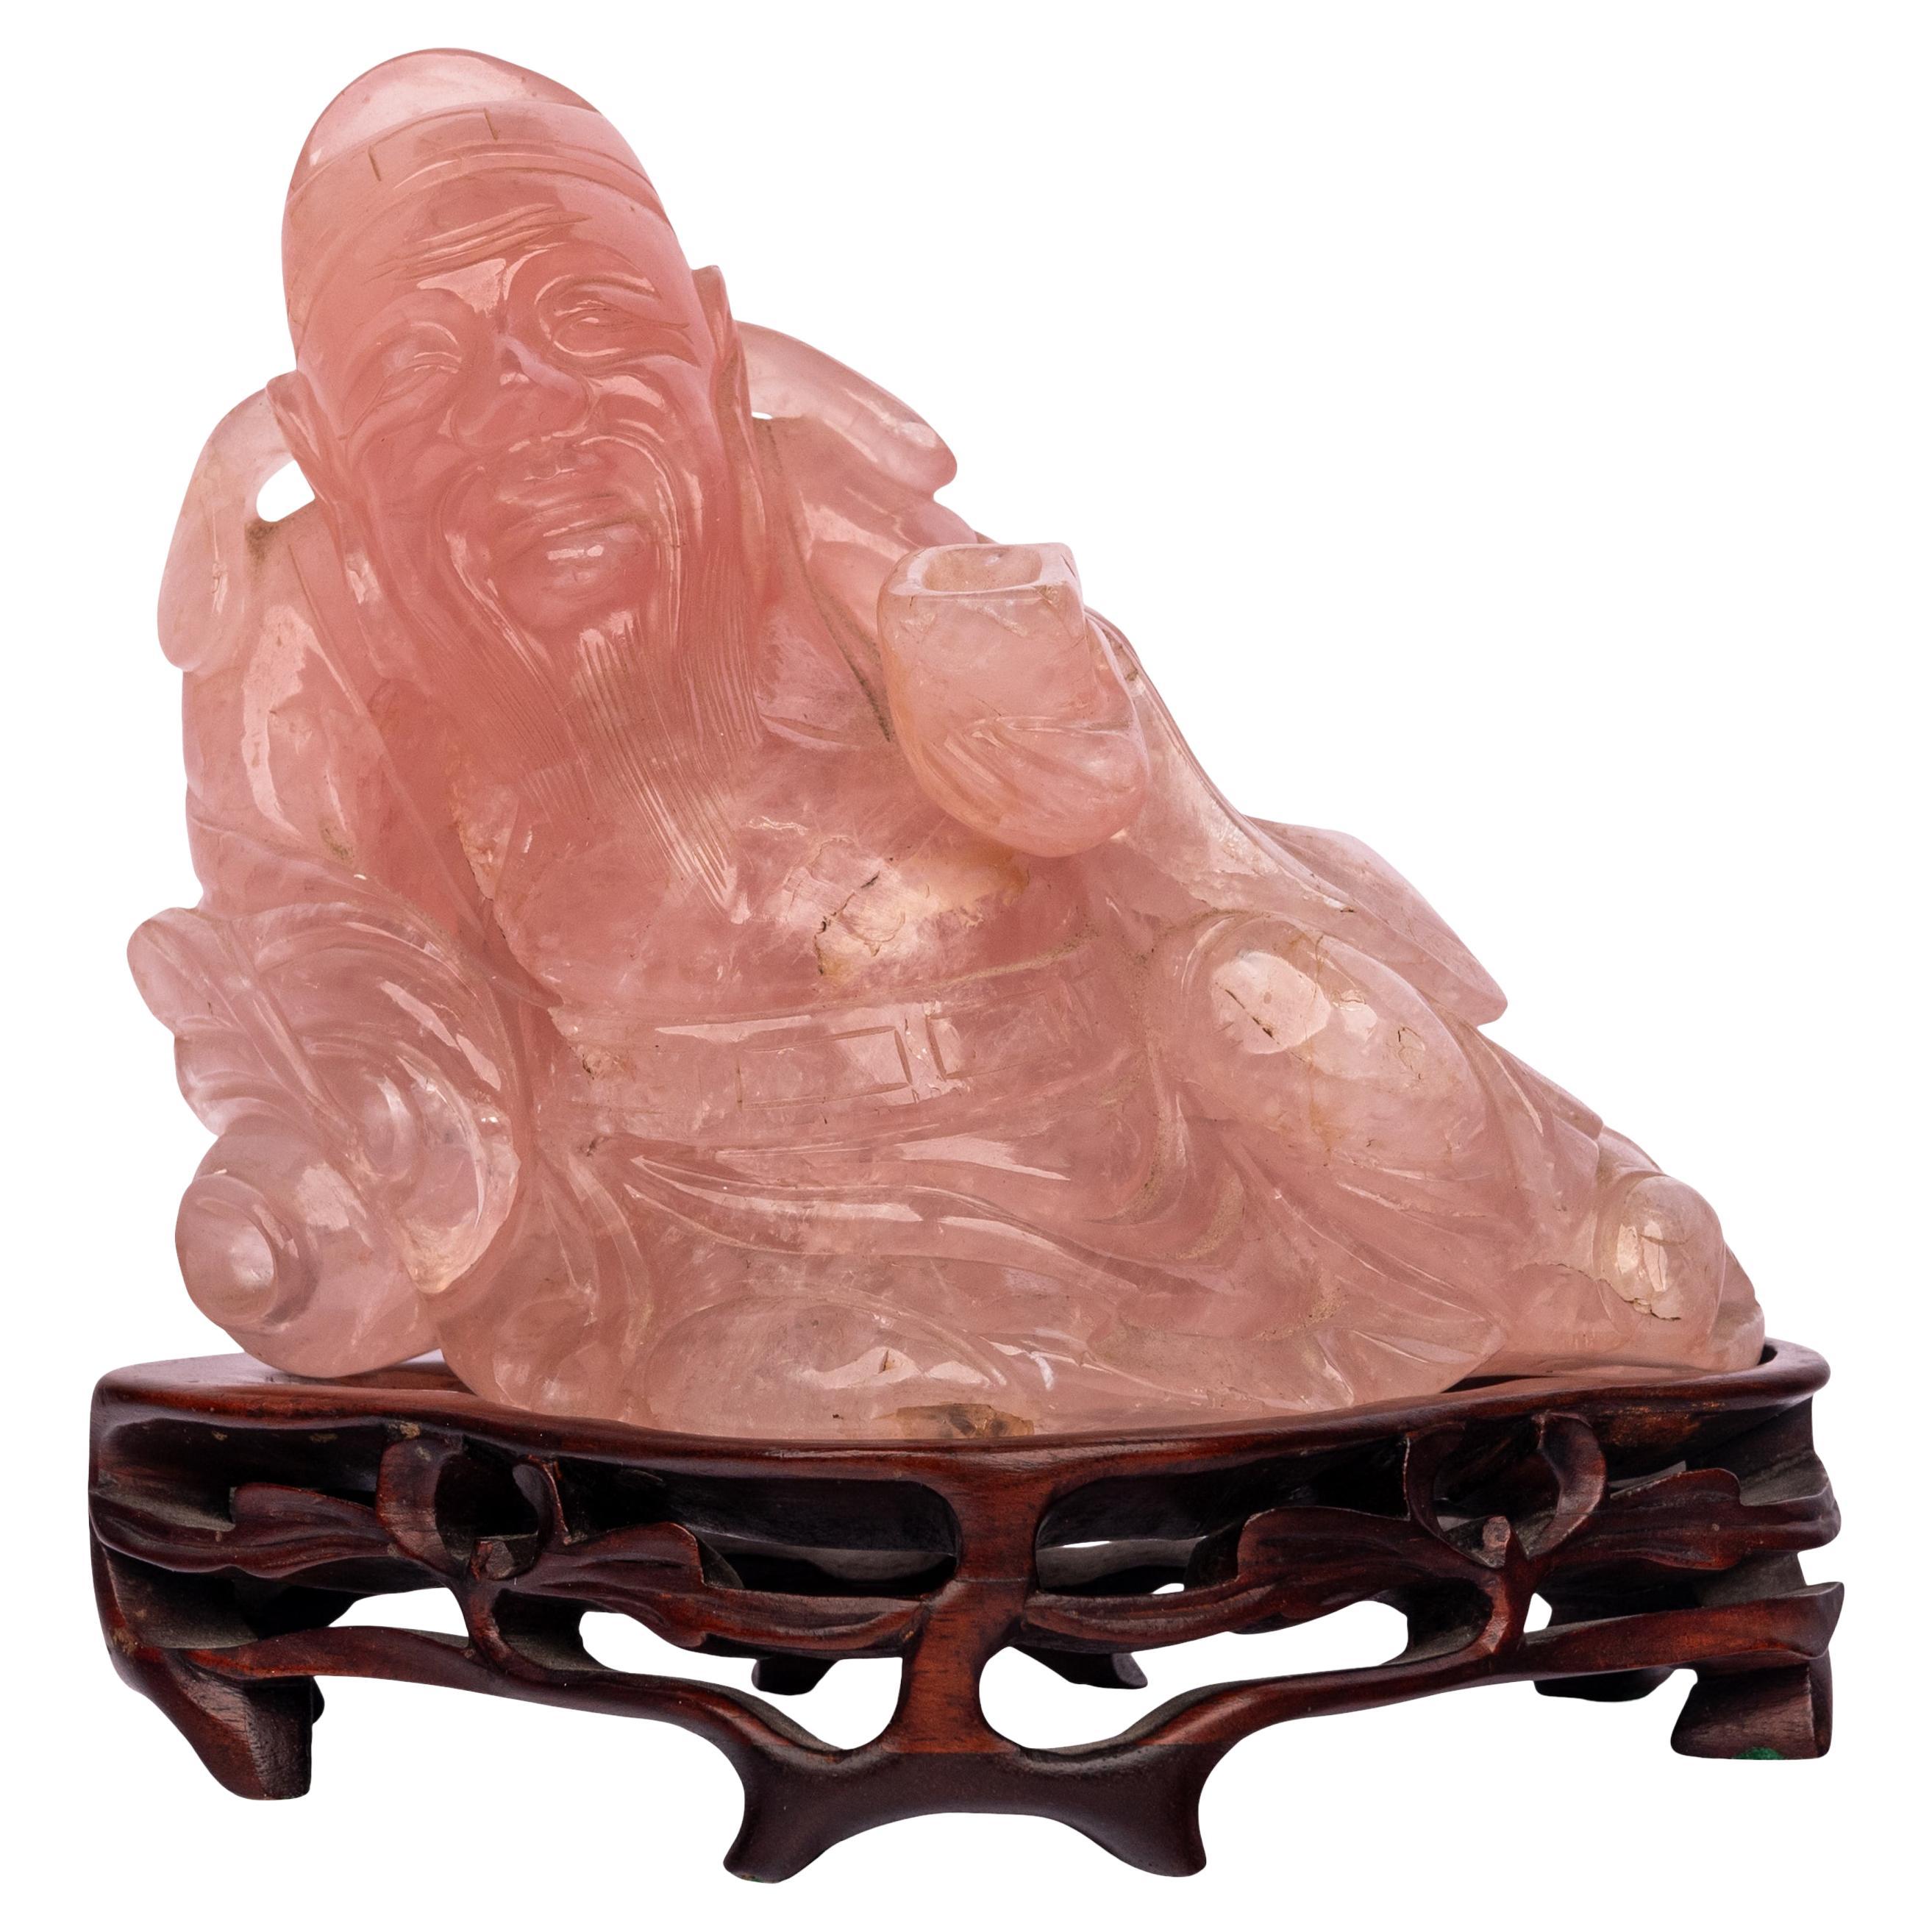 Antique Chinese Qing Dynasty Carved Rose Quartz Hotei Buddha Statue & Stand 1910